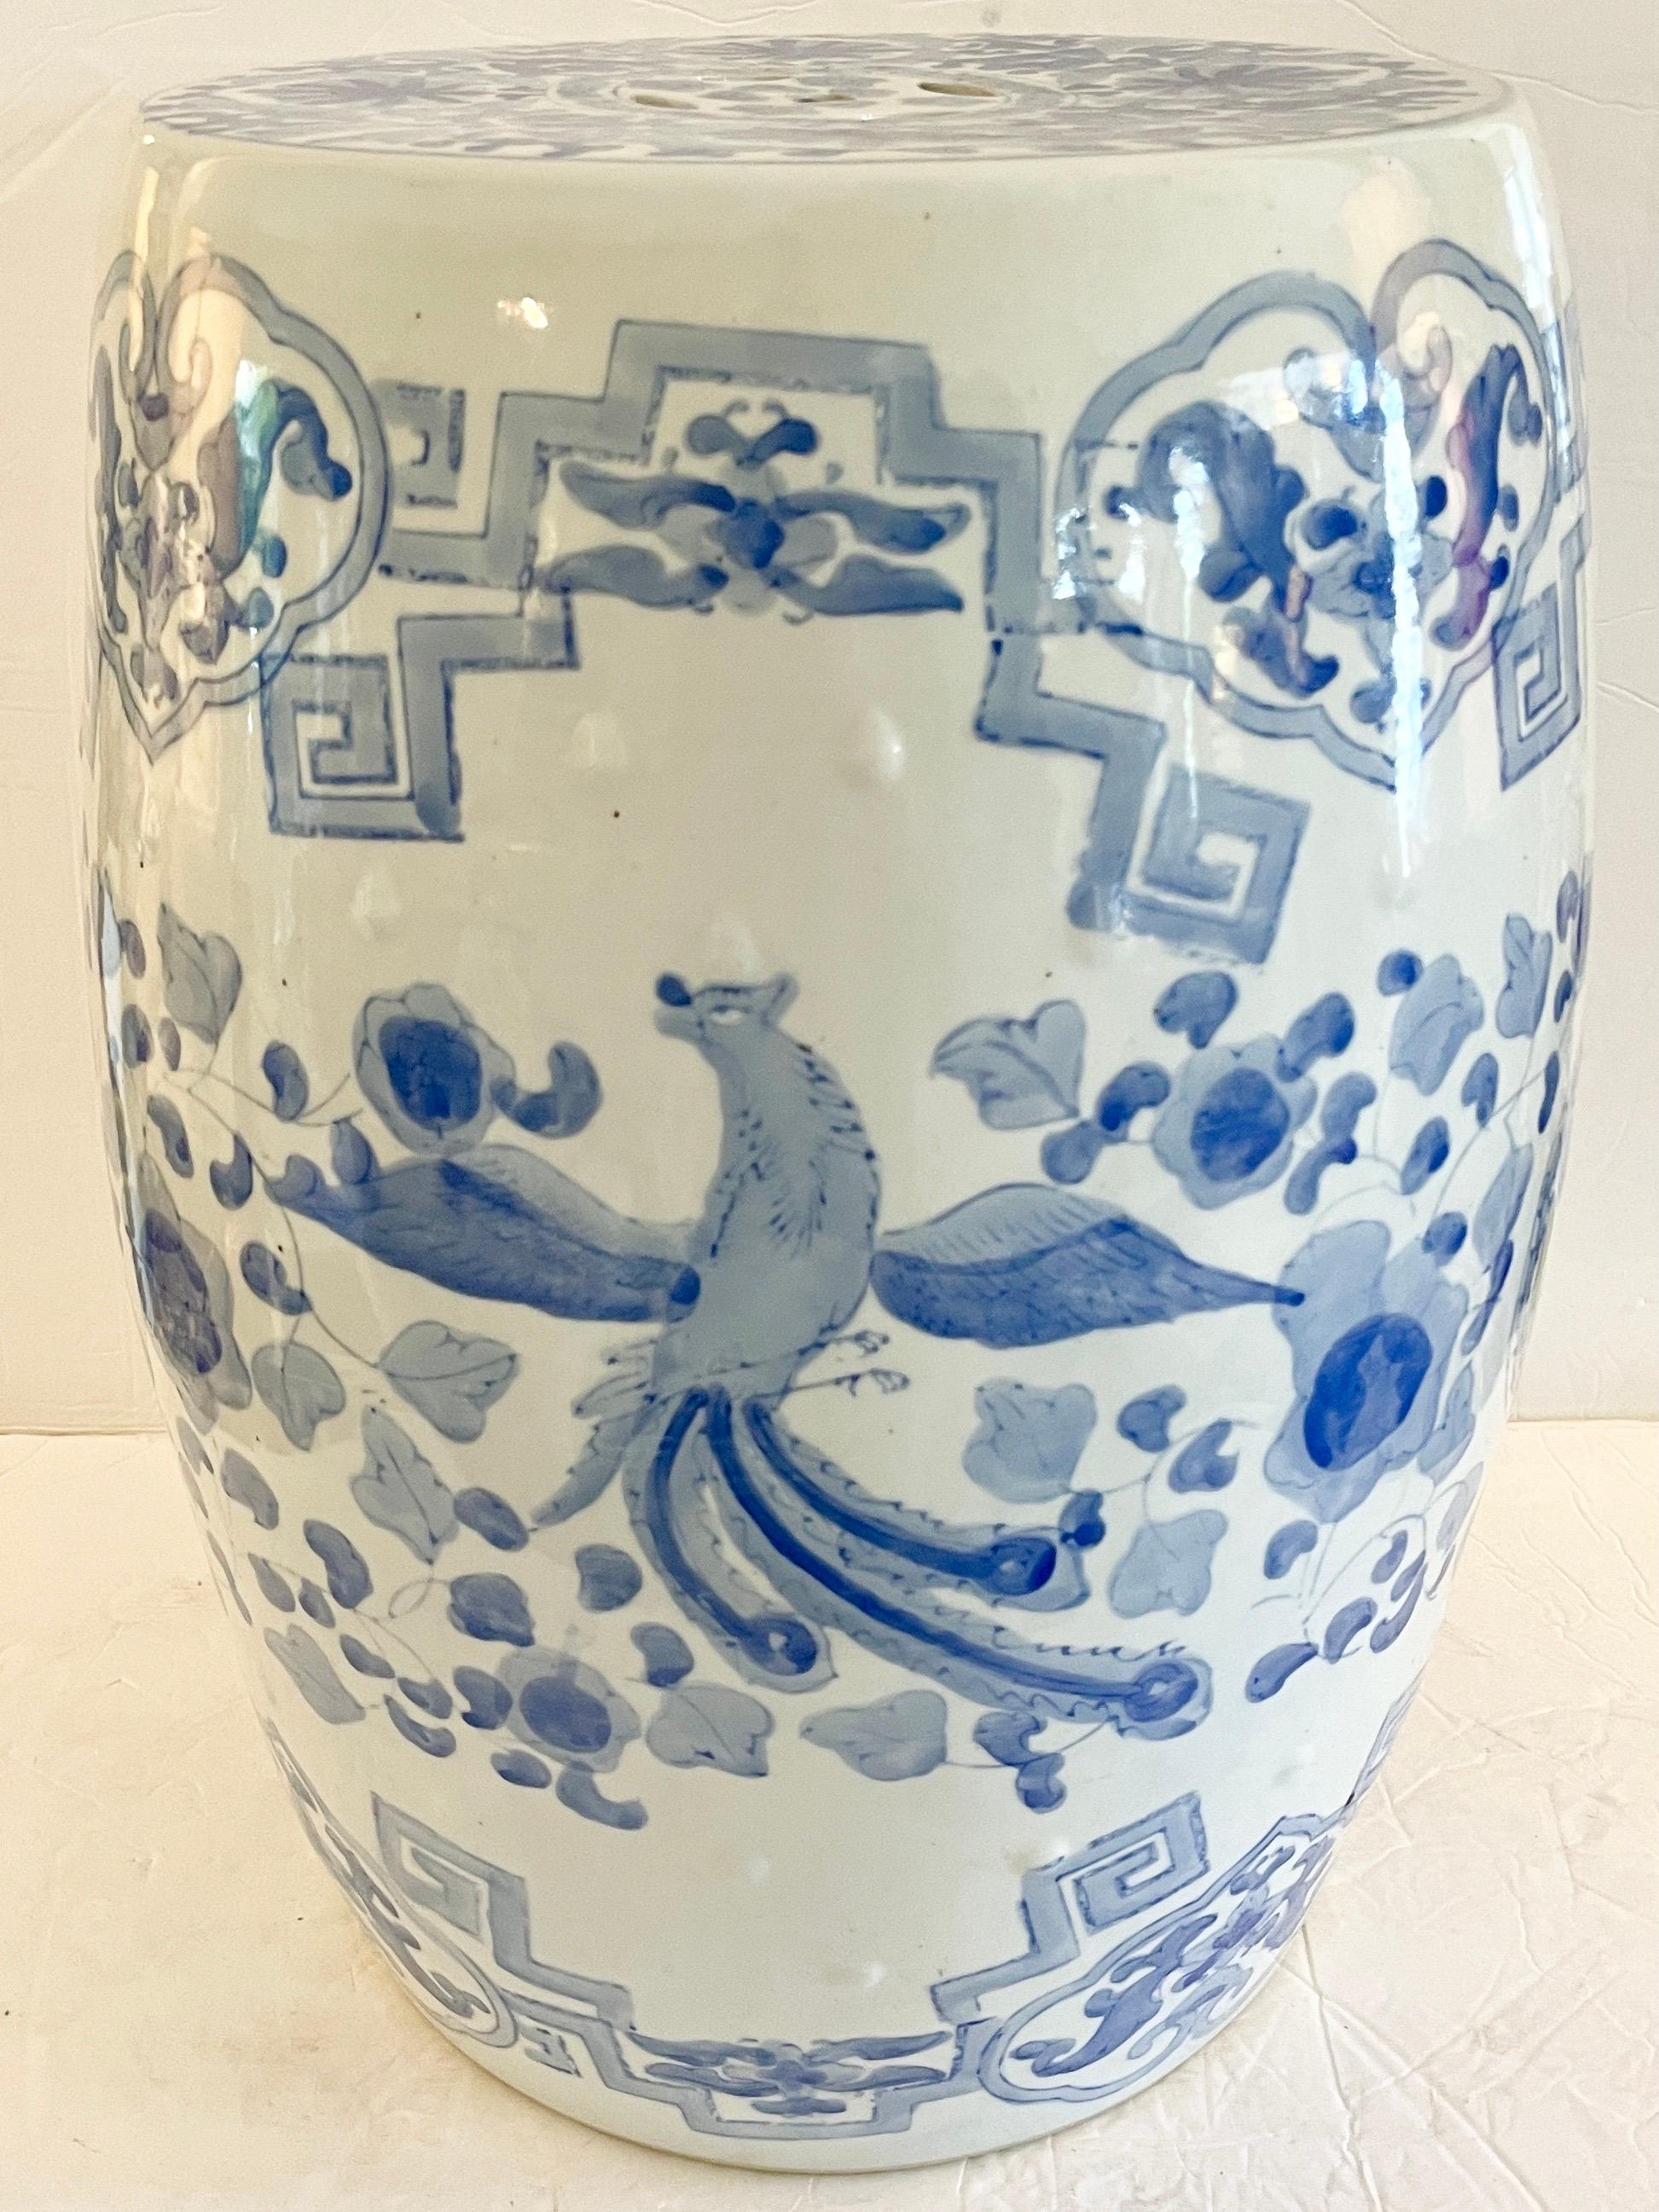 Beautiful blue and white ceramic garden seat with drawings. Great addition to your interiors and patio to hold your drinks and snacks.